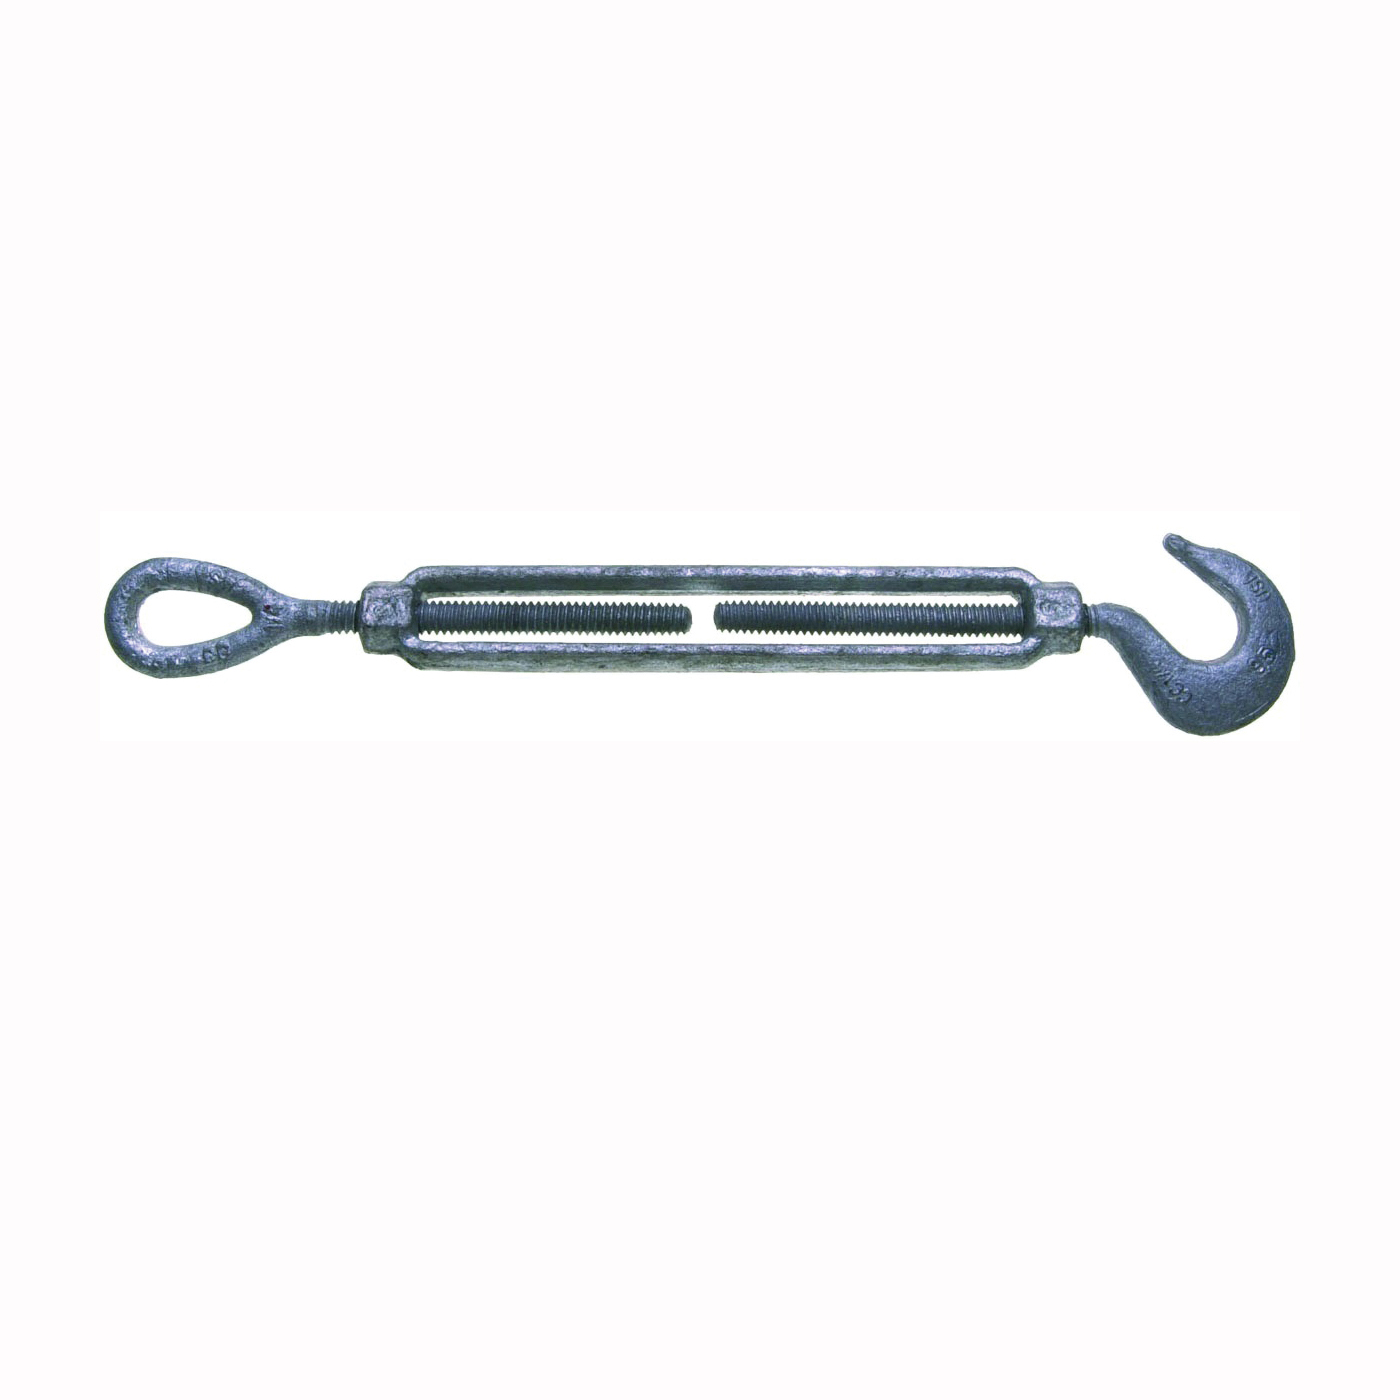 16-3/8X6 Turnbuckle, 1000 lb Working Load, 3/8 in Thread, Hook, Eye, 6 in L Take-Up, Galvanized Steel